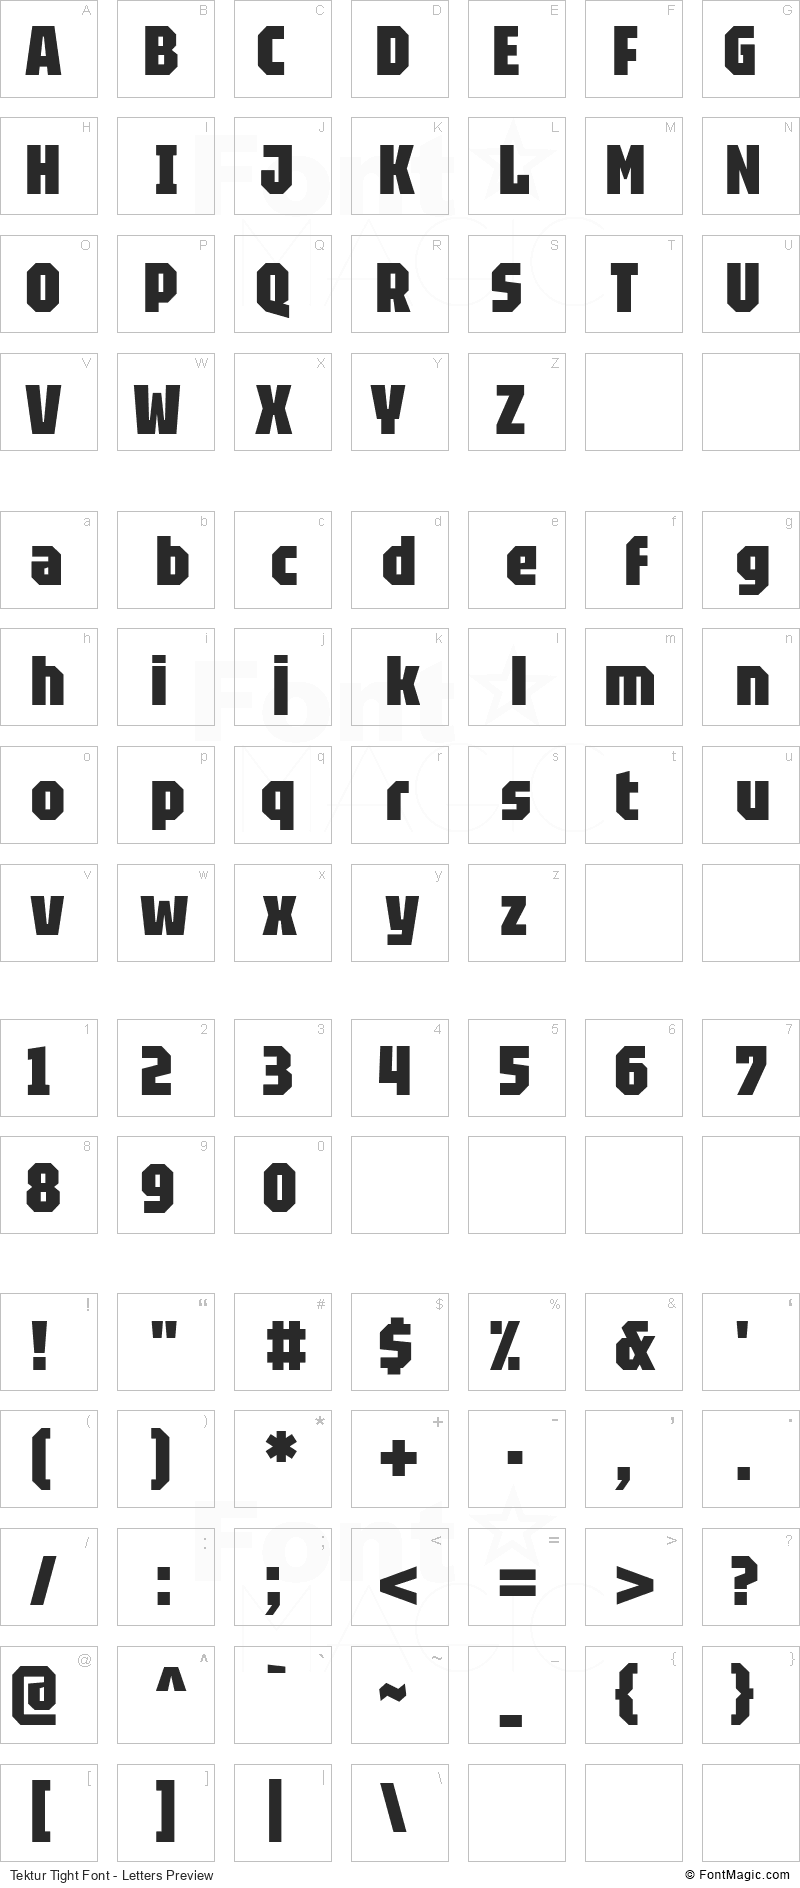 Tektur Tight Font - All Latters Preview Chart